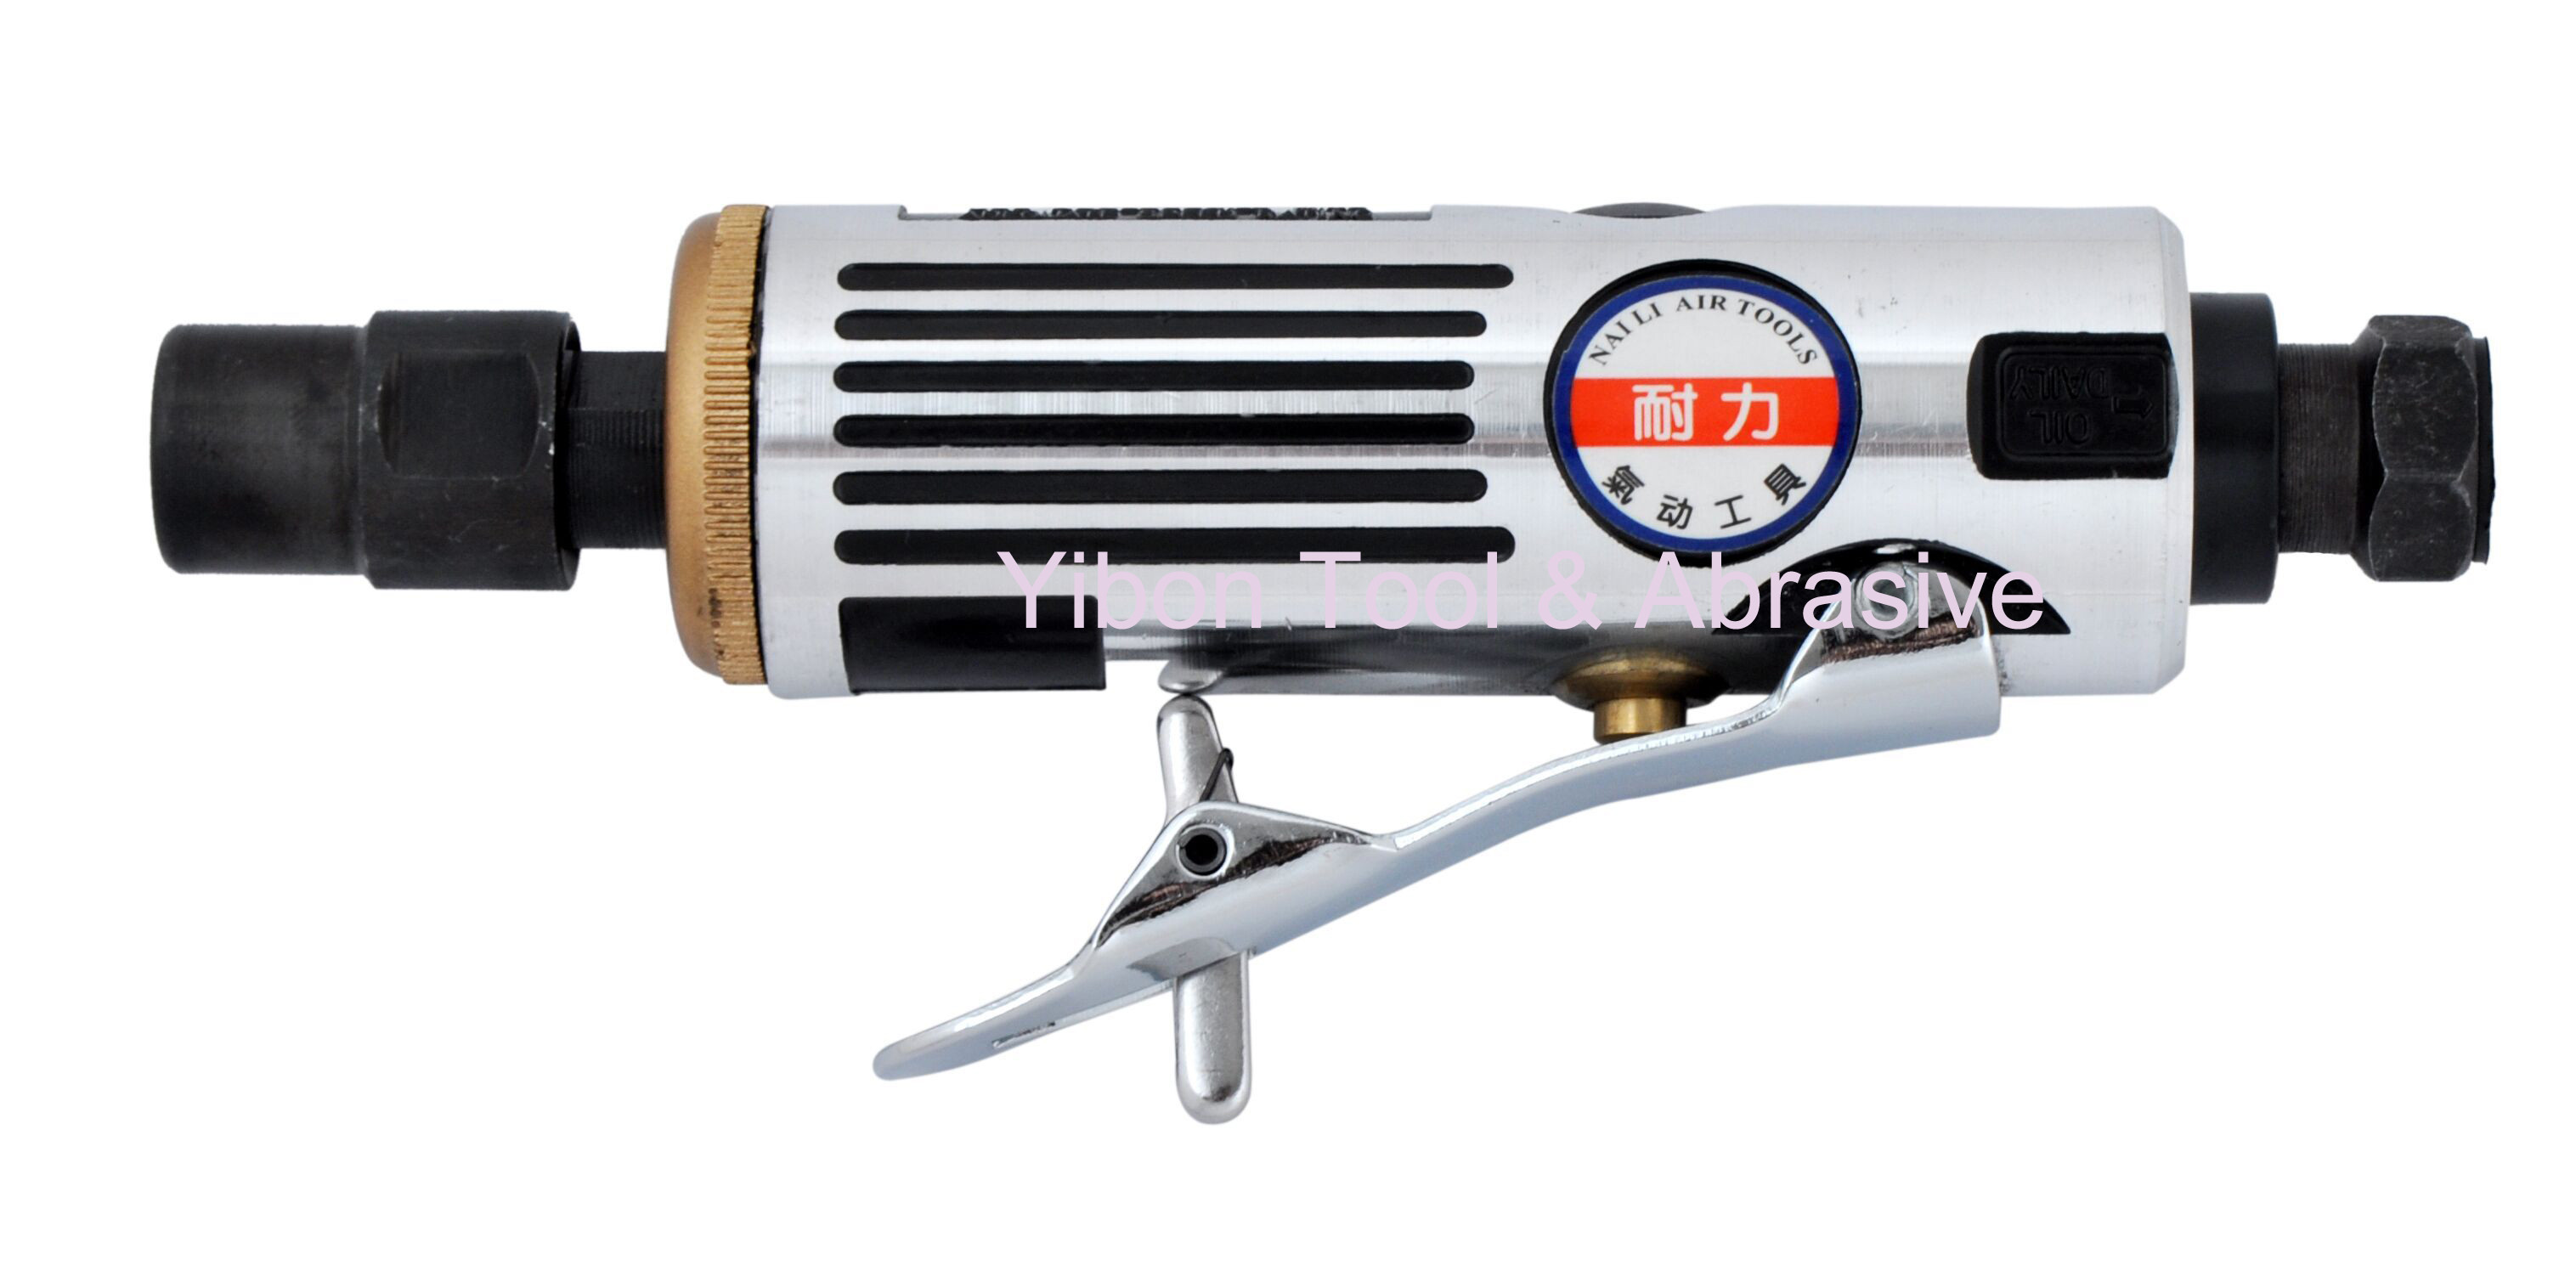 Wholesale Best quality Air Die Grinder pneumatic tools air tools air grinder from china suppliers